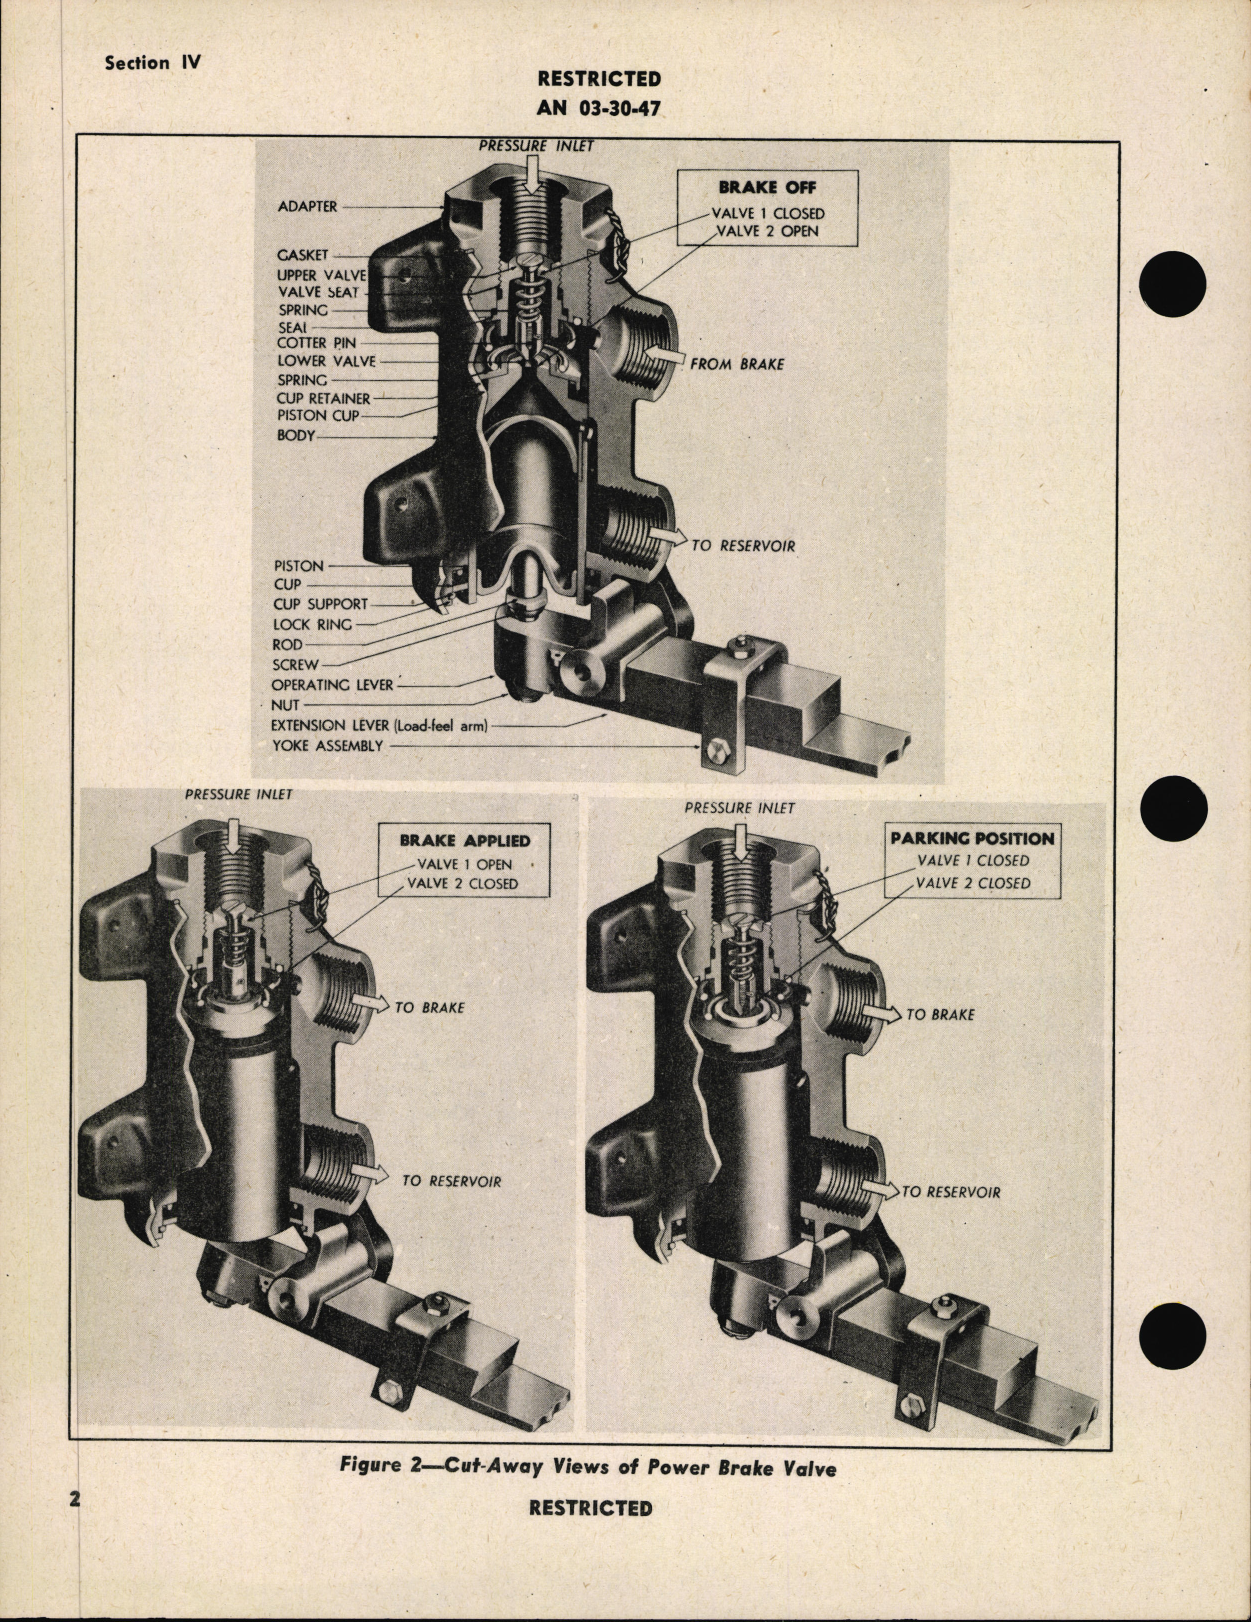 Sample page 6 from AirCorps Library document: Handbook Of Instructions With Parts Catalog for Power Brake Valves